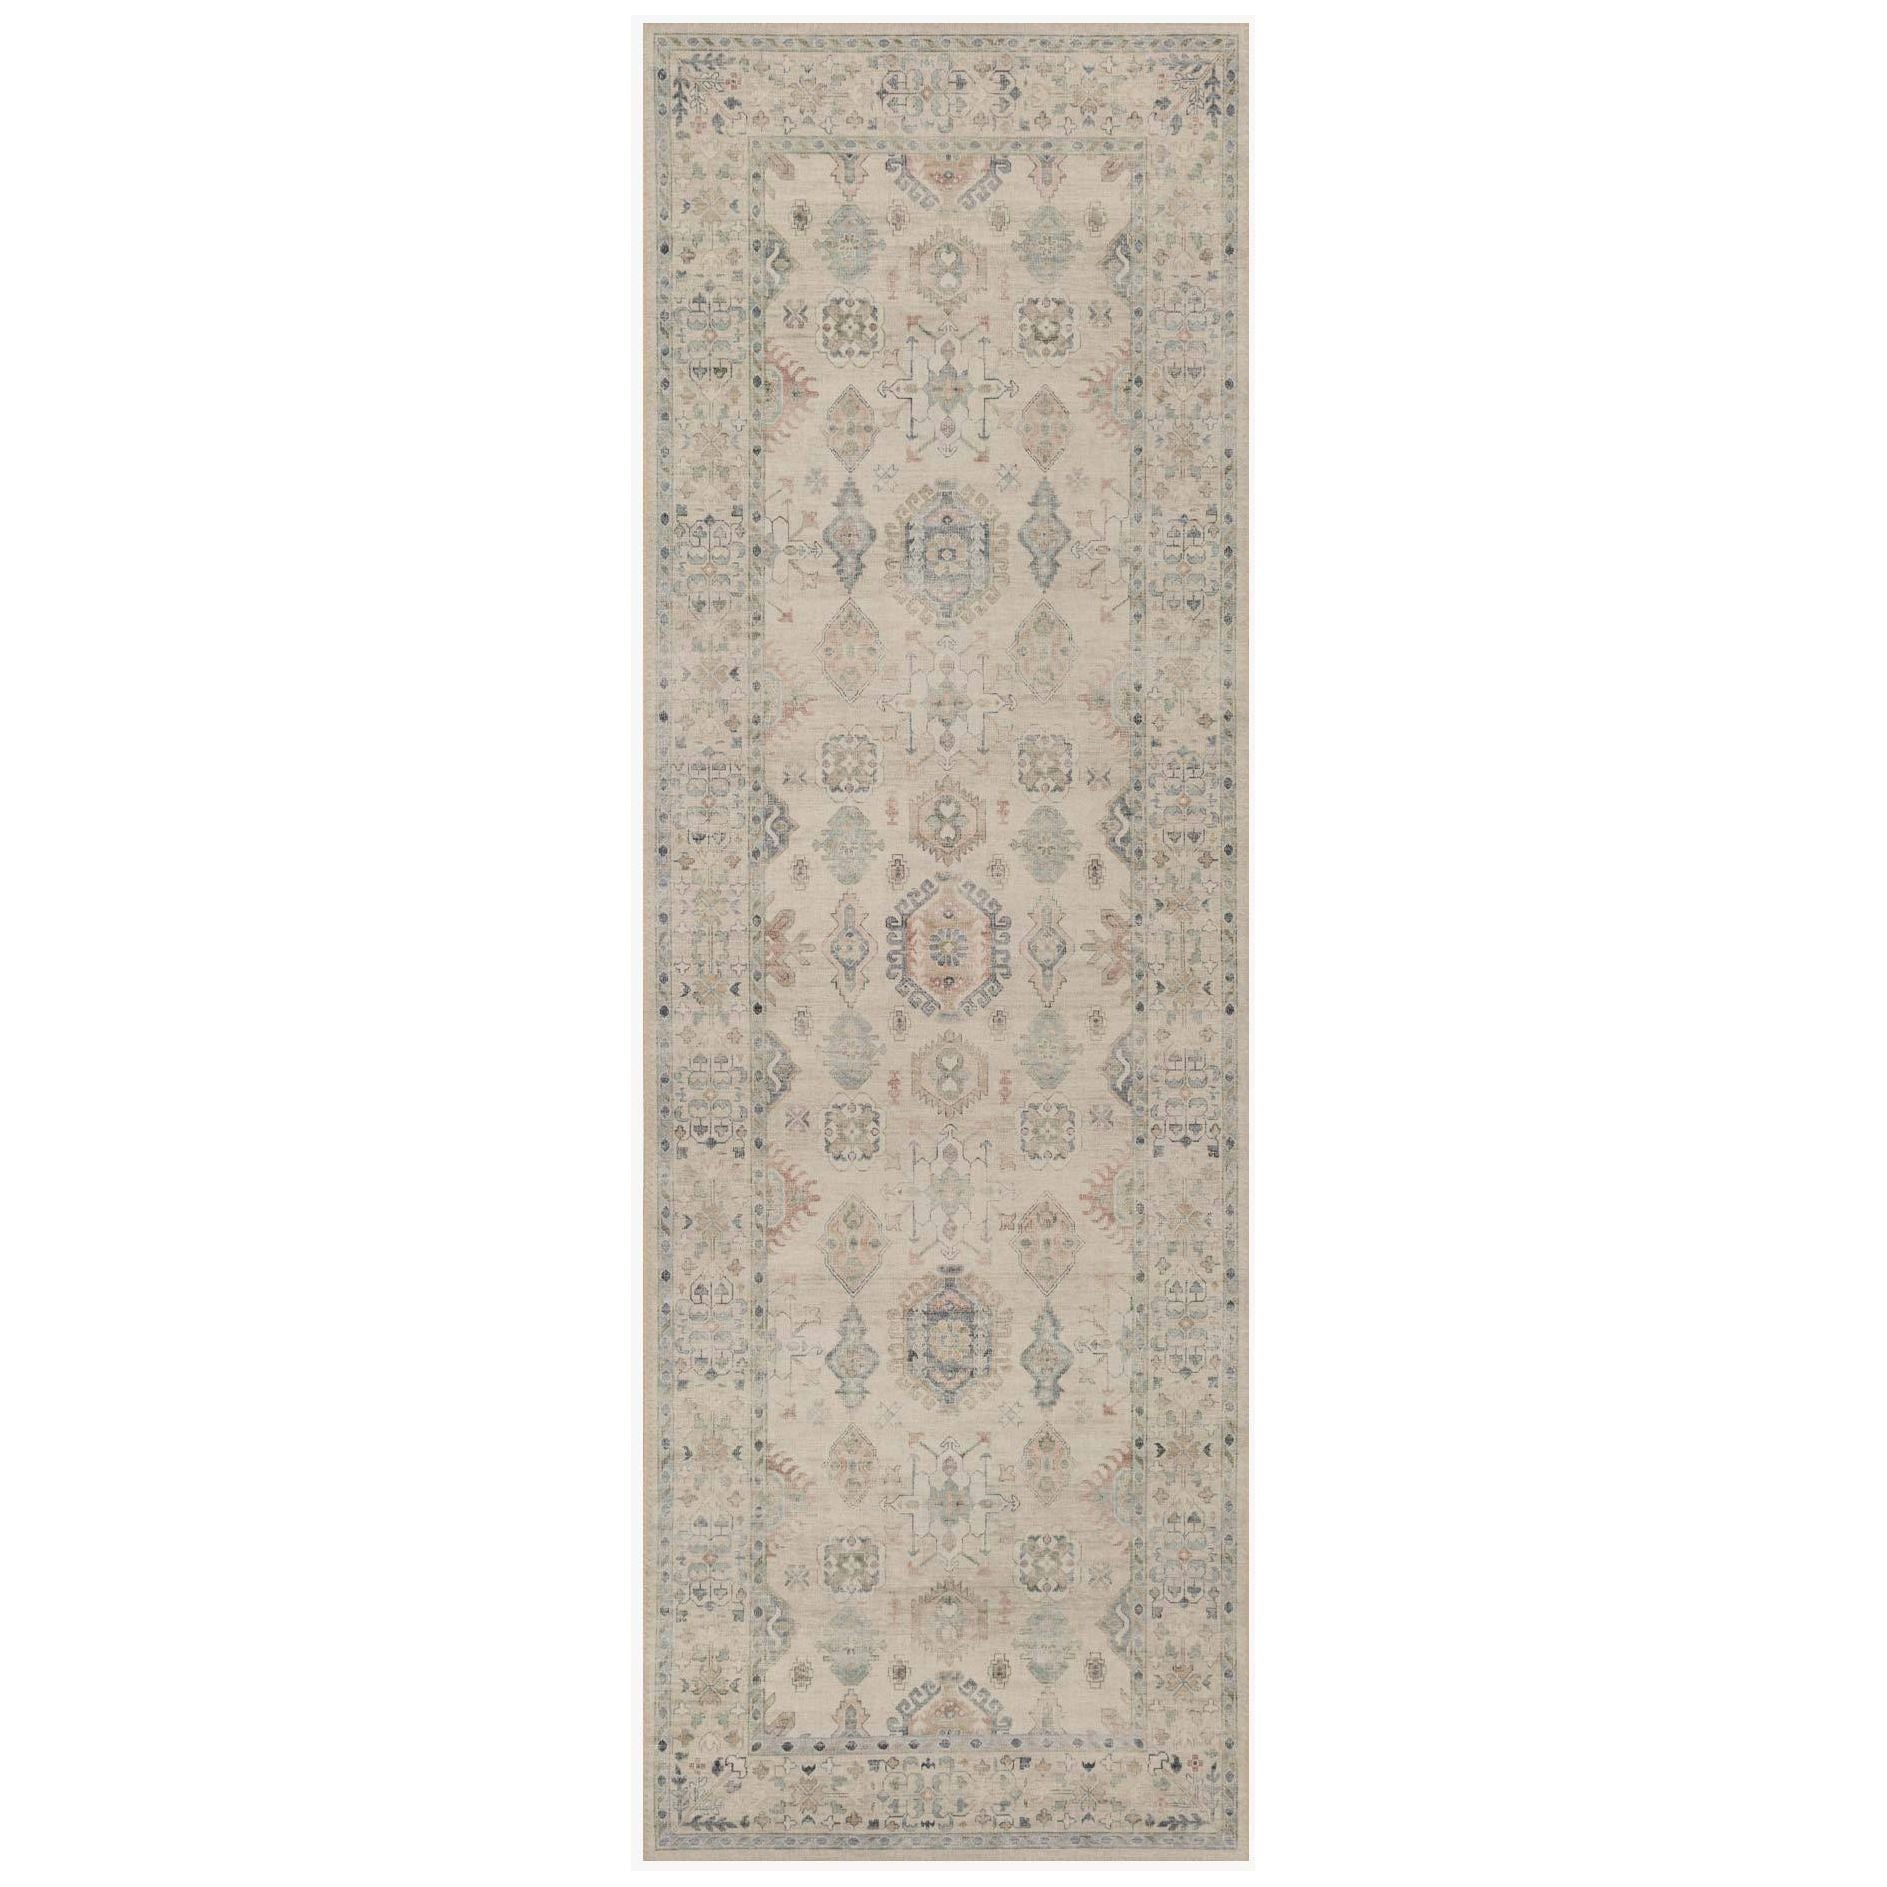 Featuring soft motifs in a carefully curated color palate of beige, ivory, and hints of black, the Hathaway Beige / Multi area rug captures the essence of one-of-a-kind vintage or antique area rug. This rug is ideal for high traffic areas such as living rooms, dining rooms, kitchens, hallways, and entryways.